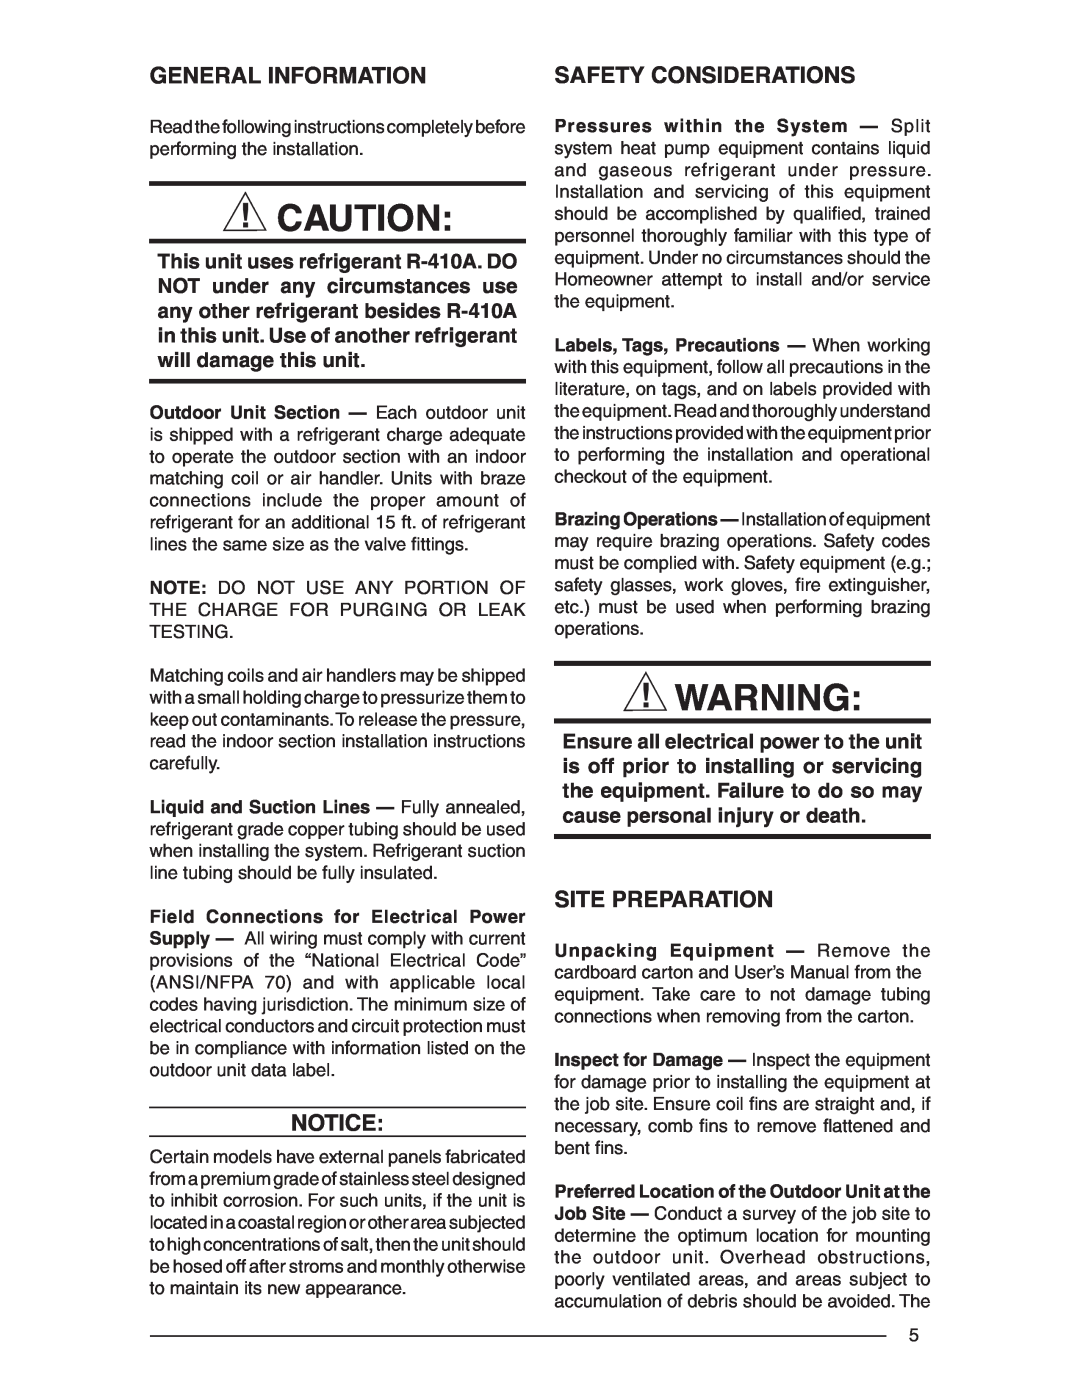 Nordyne R-410A installation instructions General Information, Safety Considerations, Site Preparation 